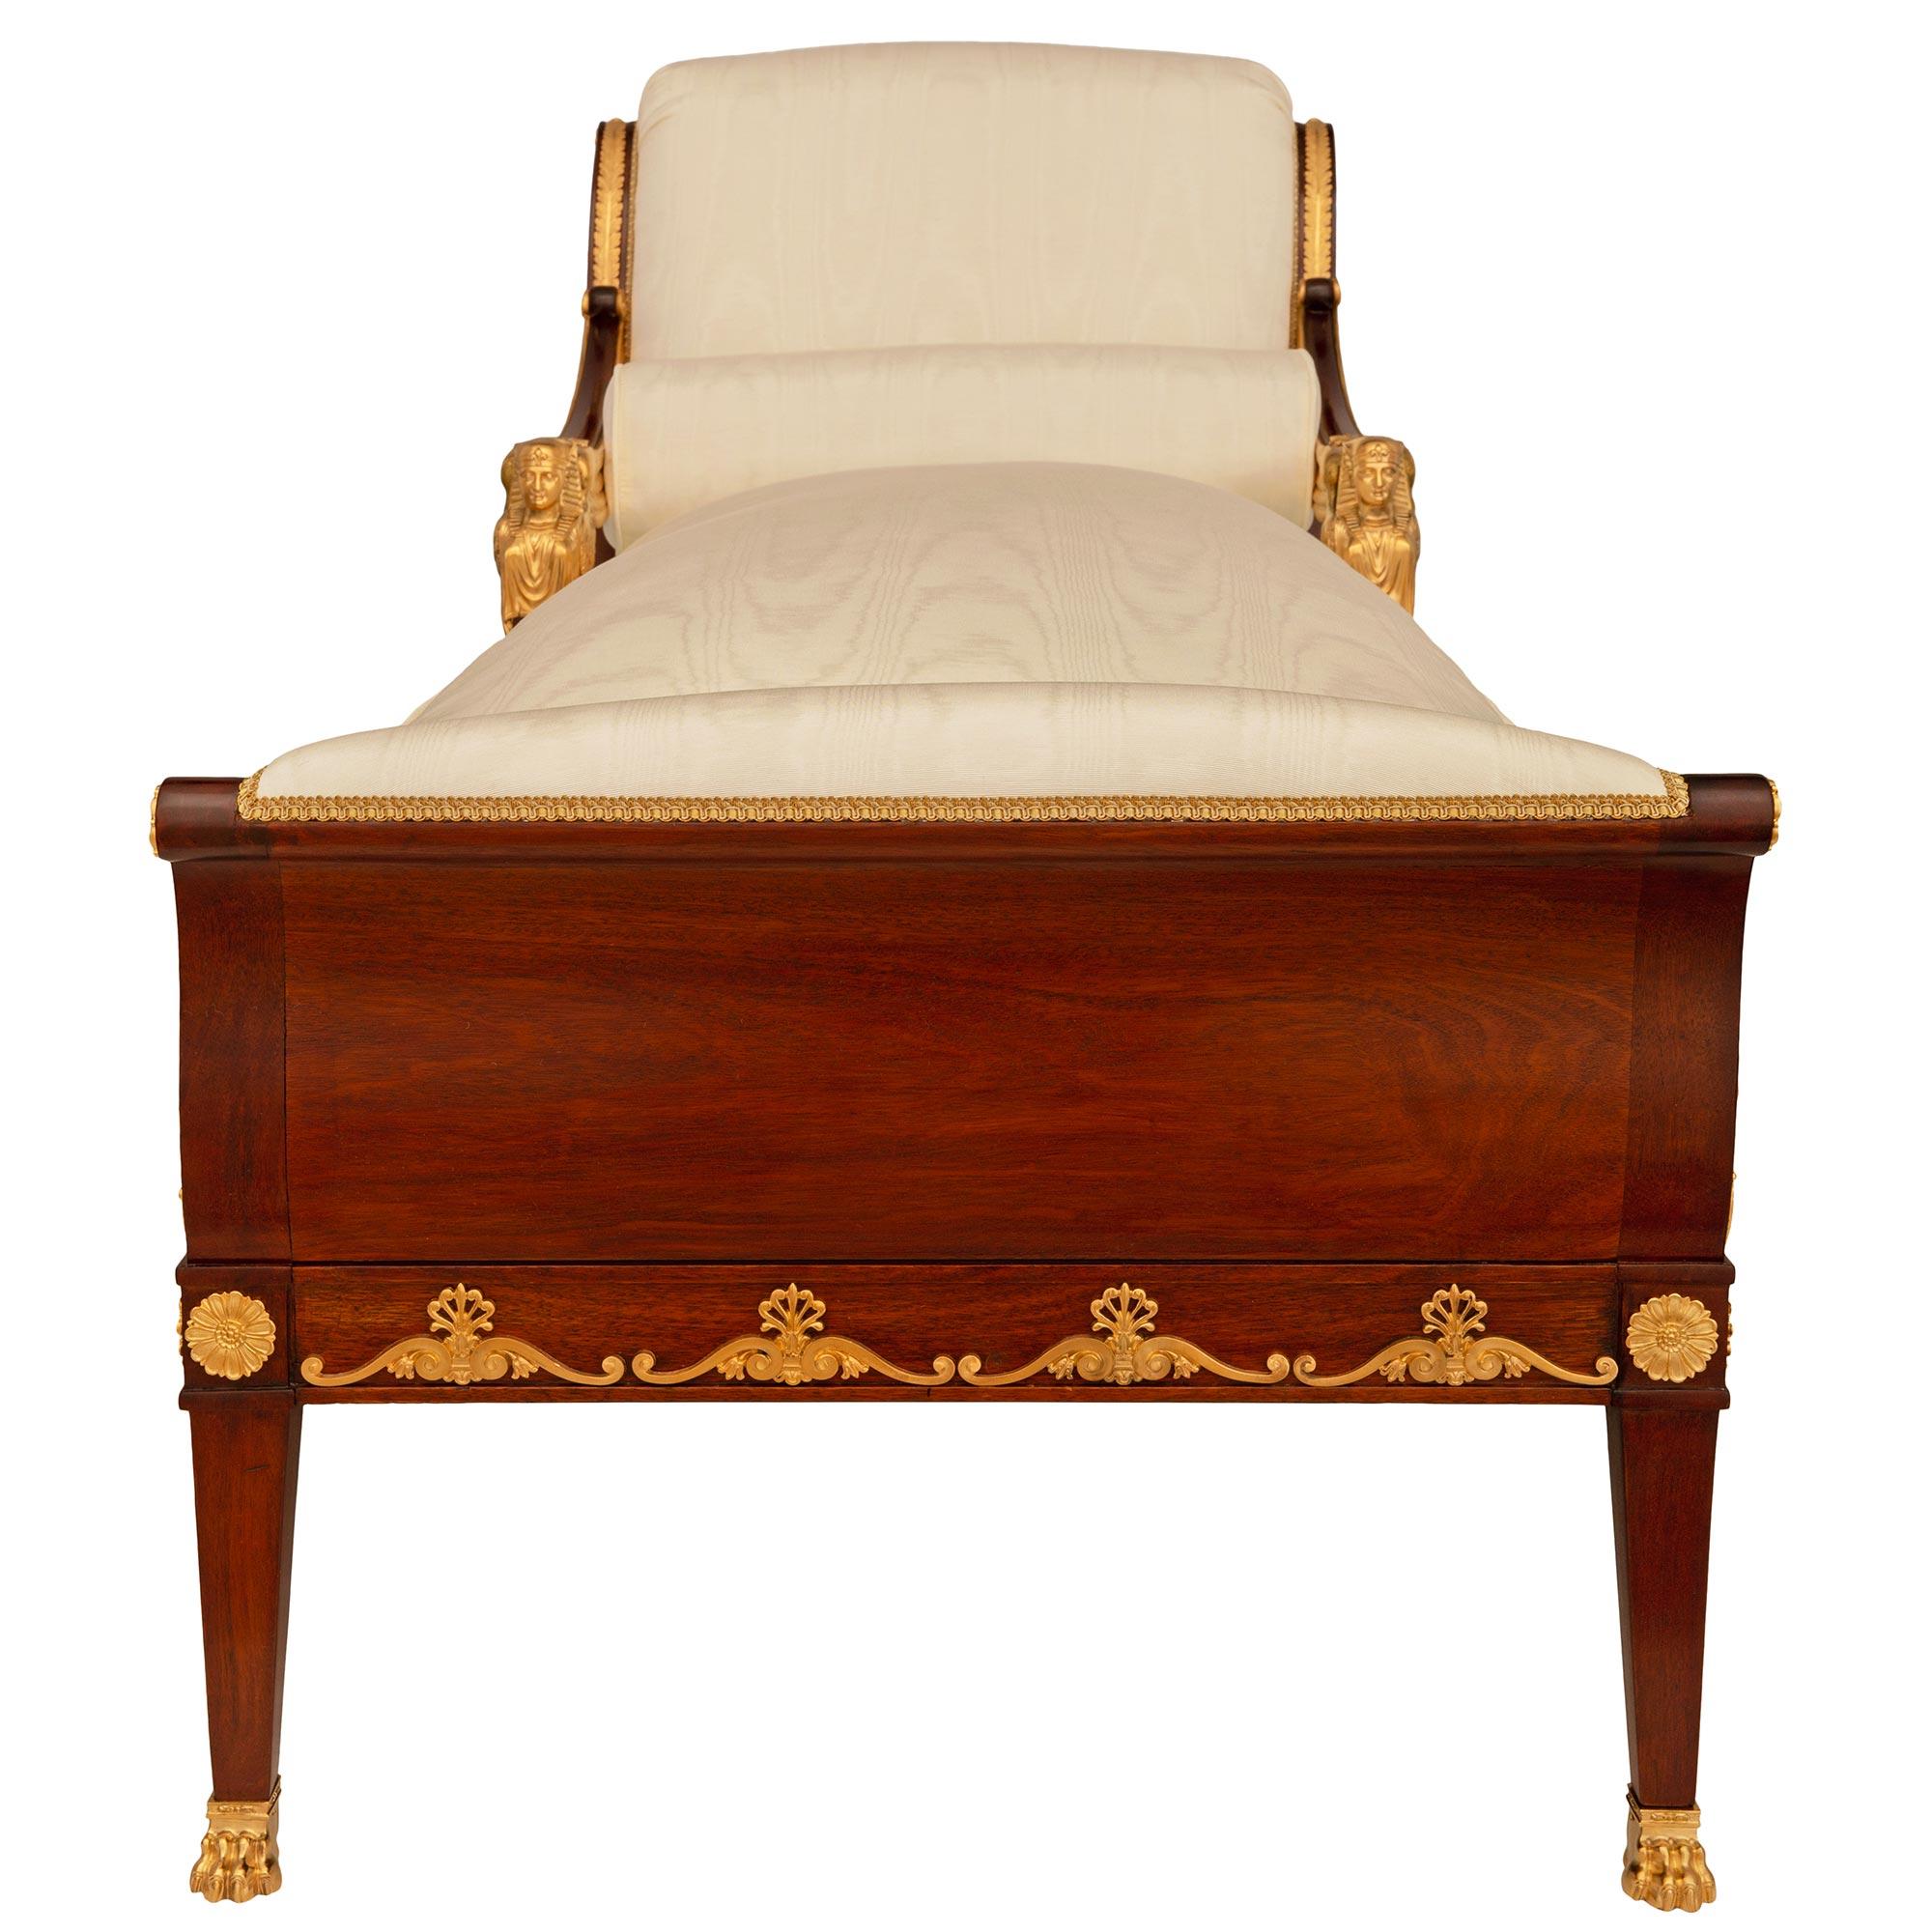 19th Century French early 19th century Empire period Mahogany and Ormolu chaise, Circa 1805 For Sale